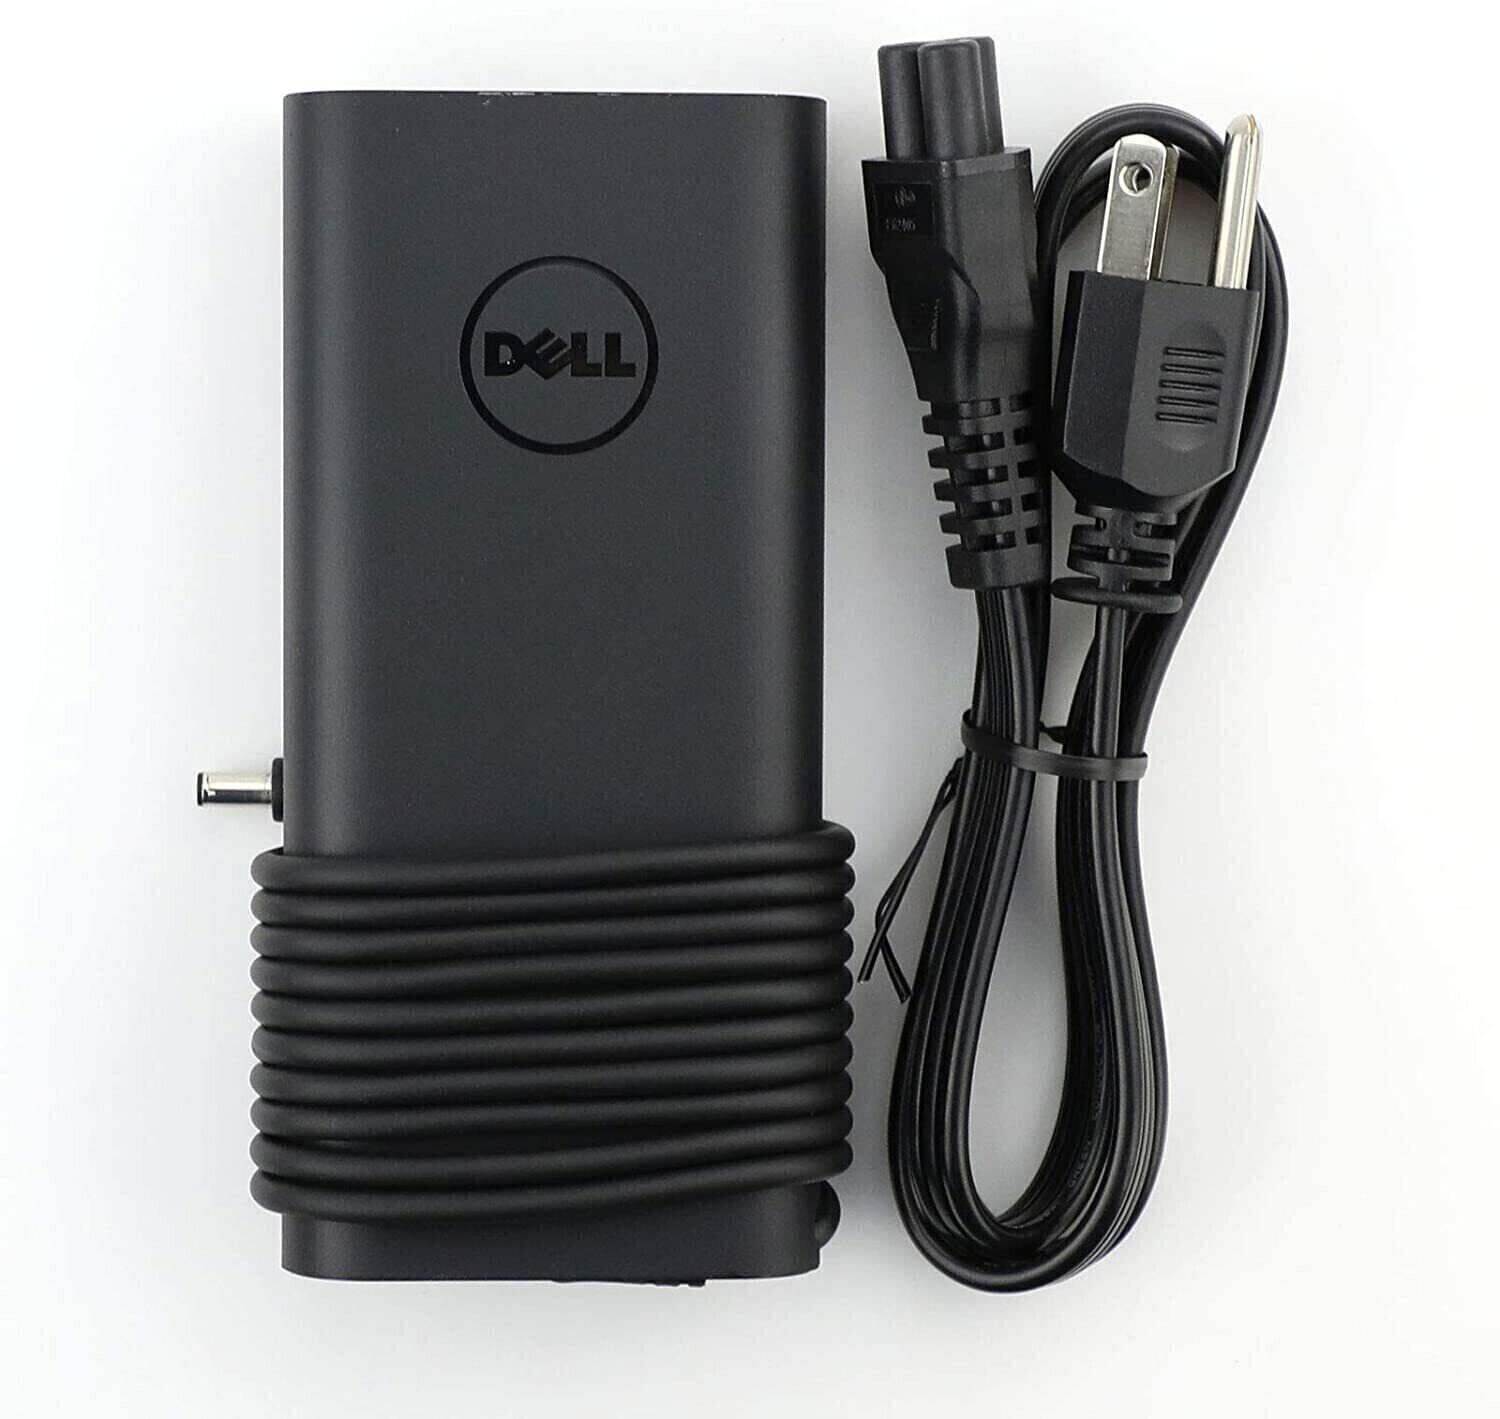 OEM 130W Charger For Dell XPS 15 9530 9550 9560 9570 7590 06TTY6 Power Adapter